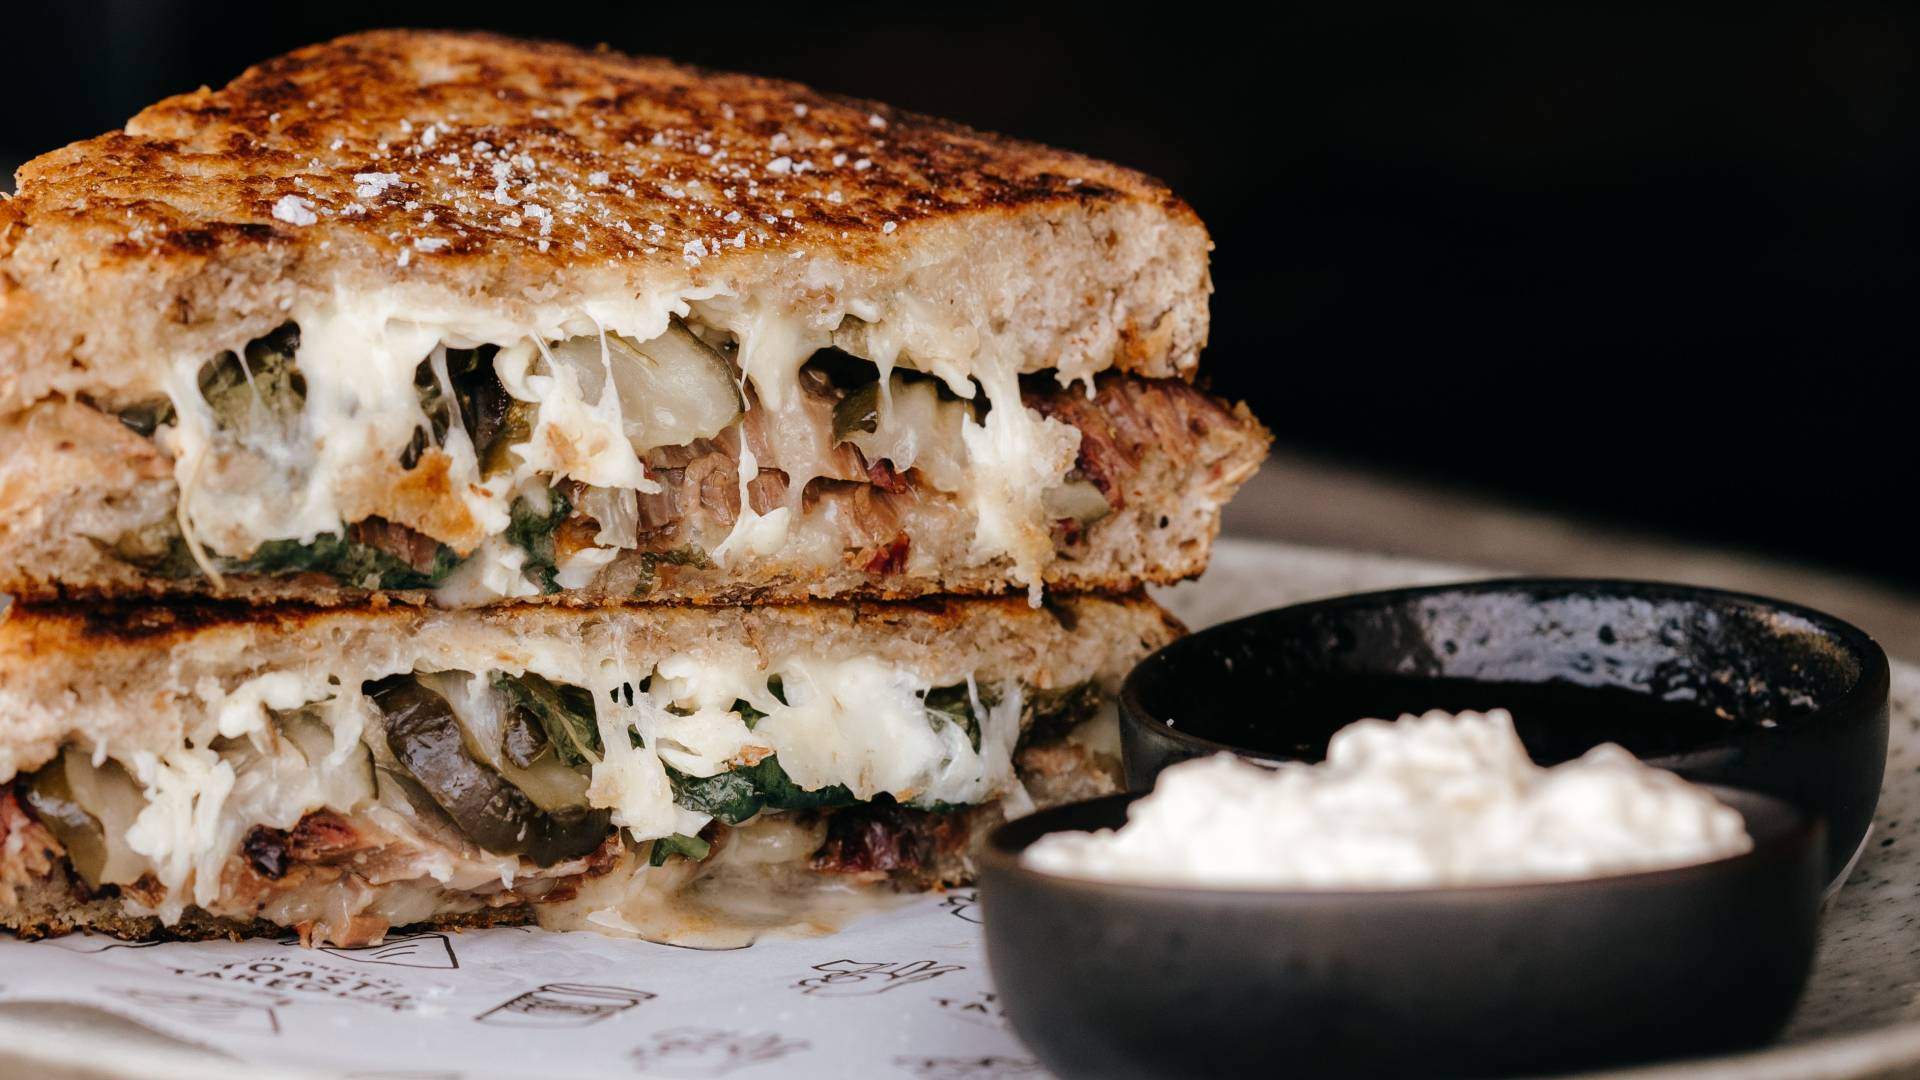 Here's Where to Find This Beer-Brined Brisket Toastie That's Just Been Crowned the Best in NZ